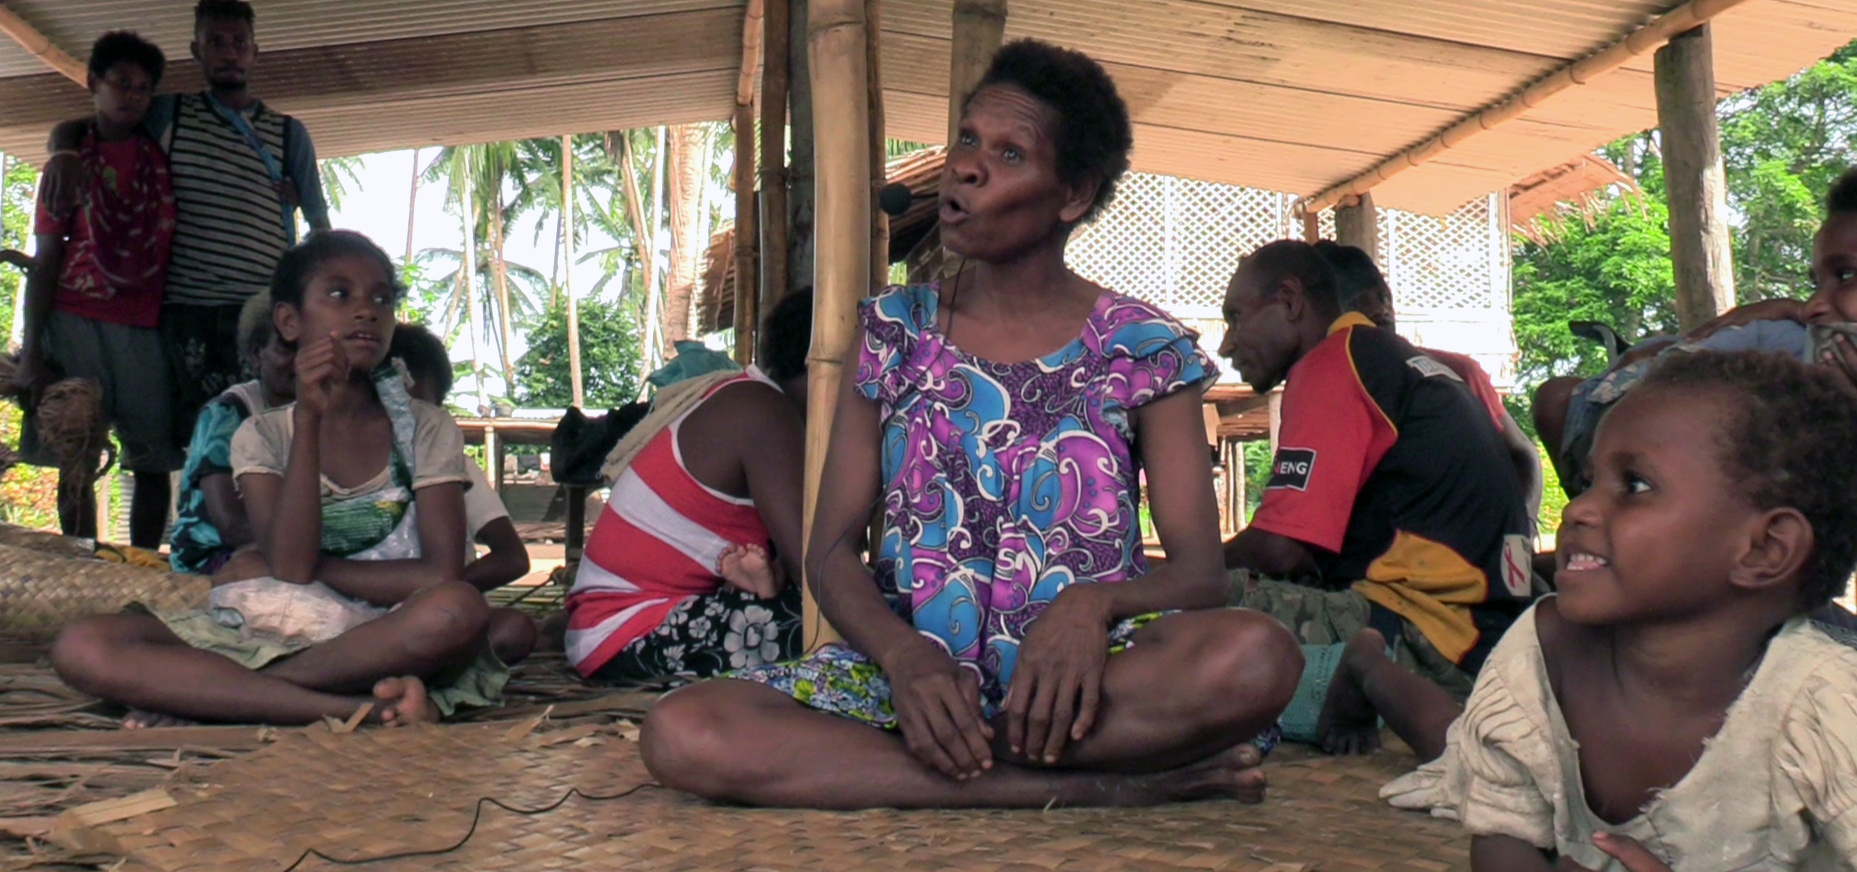 A comprehensive documentation of Bine - a language of Southern New Guinea by Christian Doehler